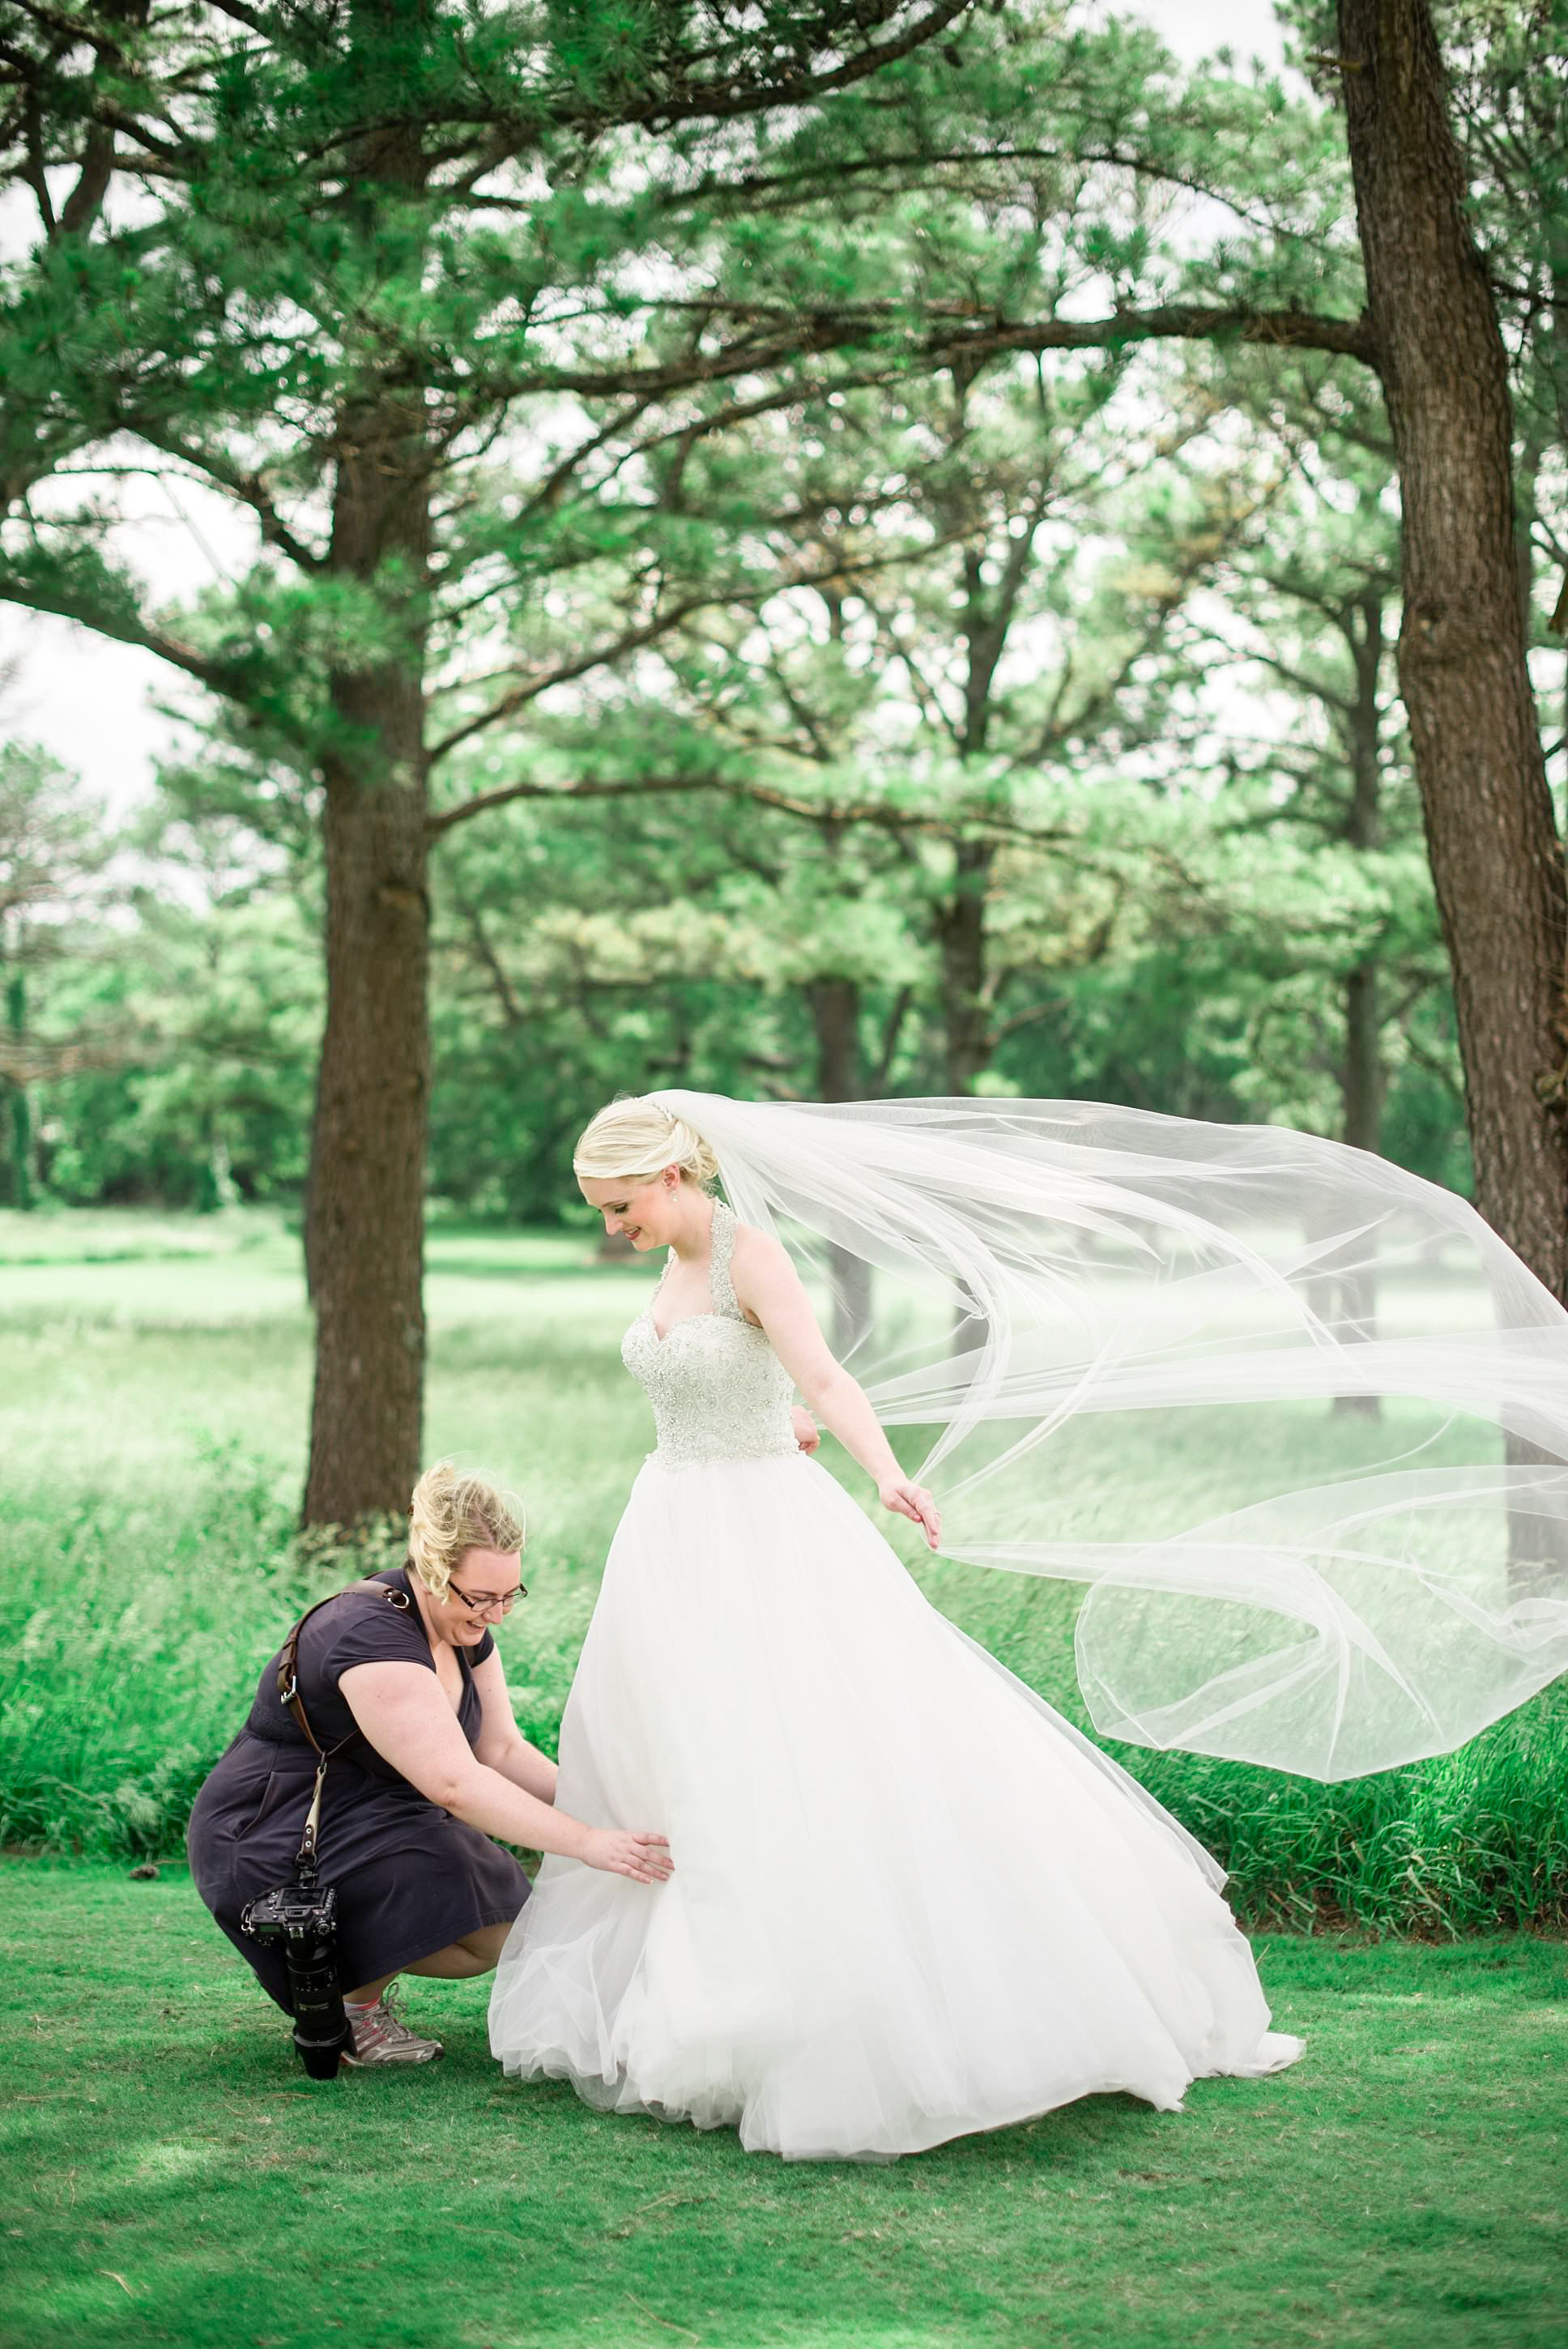 Behind the scenes photo of photographer adjusting the brides dress on a windy day at Stones River Country Club